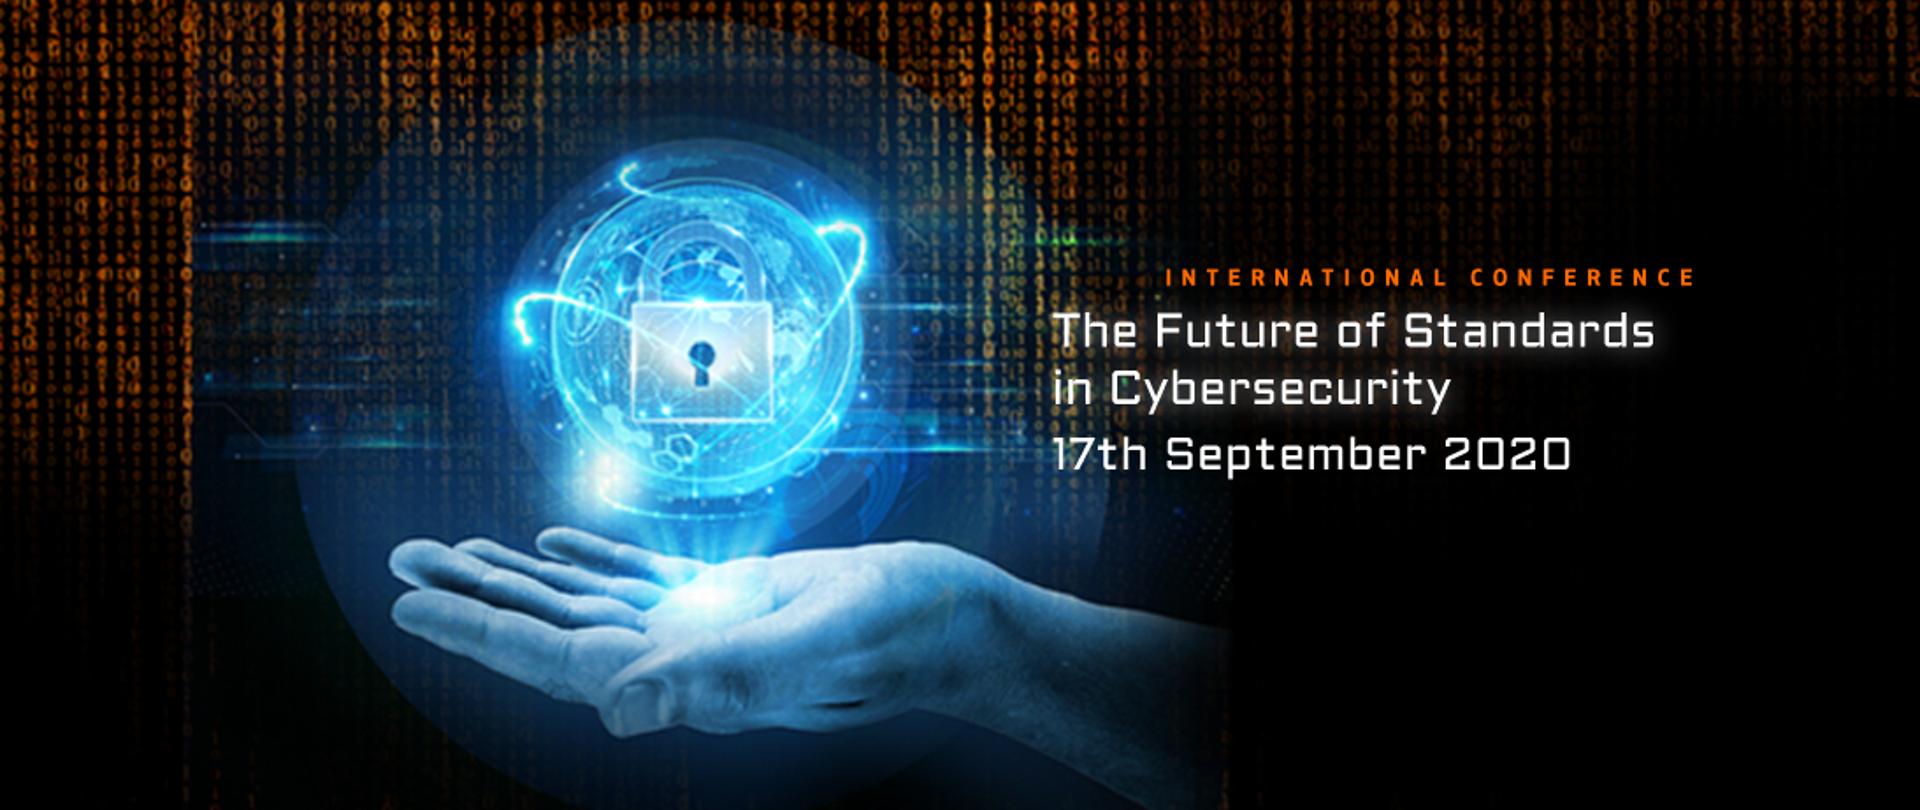 Grafika z napisem: International Conference The Future of Standards in Cybersecurity 17th September 2020